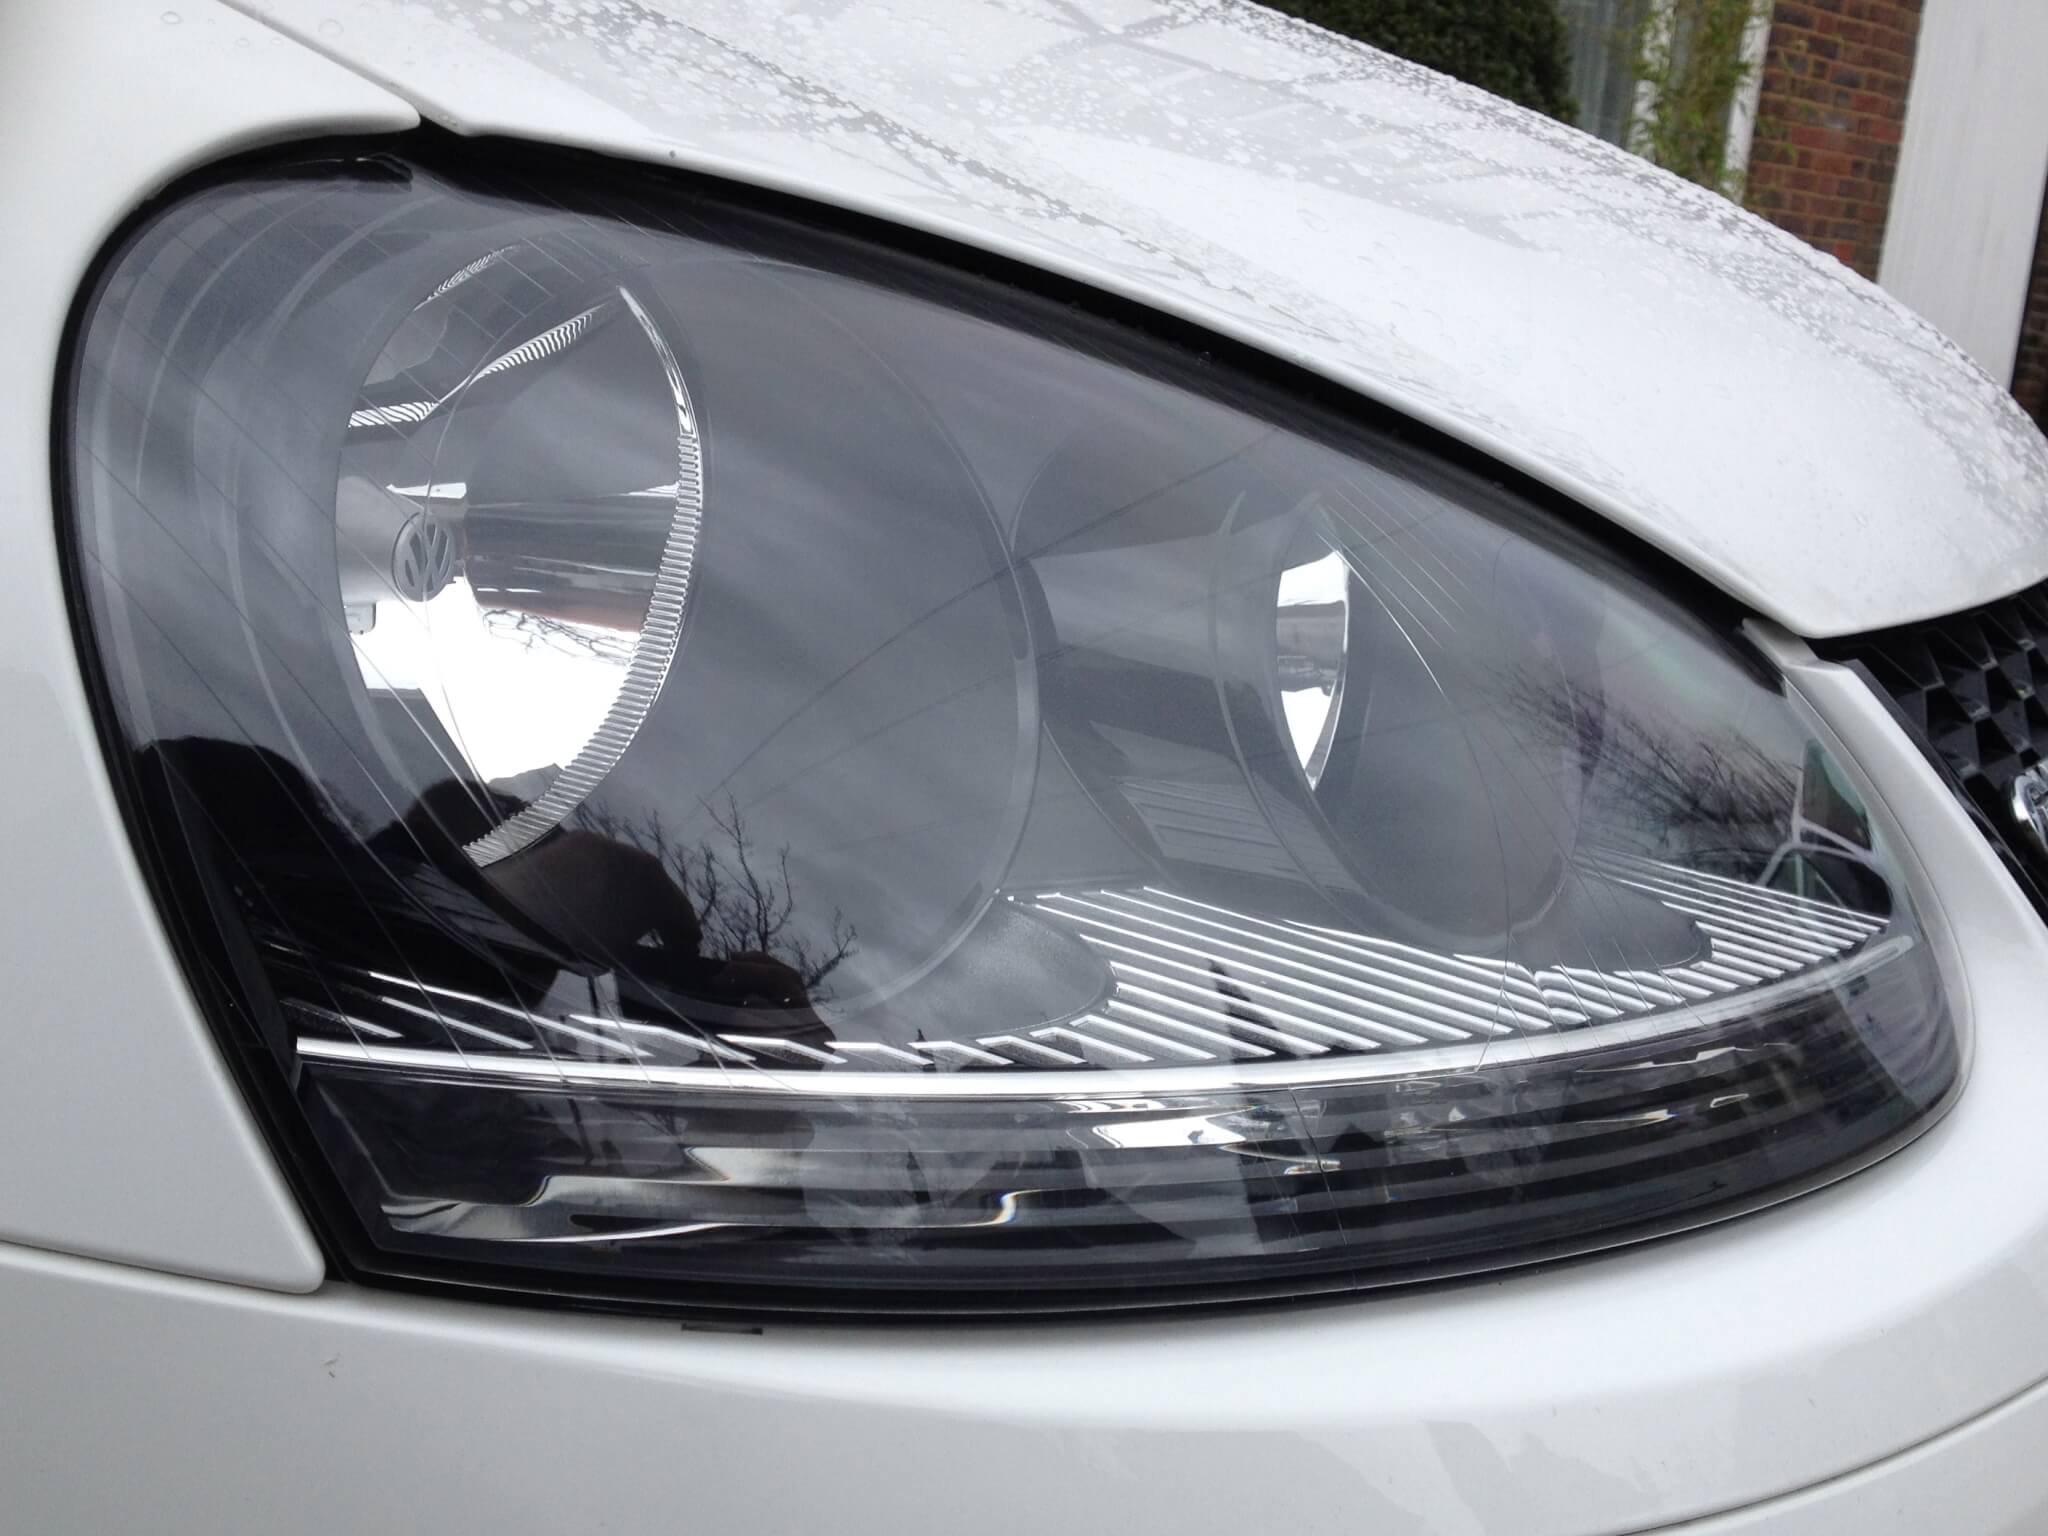 Close-up view of a car's headlight with a clear lens and sleek design, showing reflections and minor rain droplets on the surface, enhanced by paint protection film (PPF).